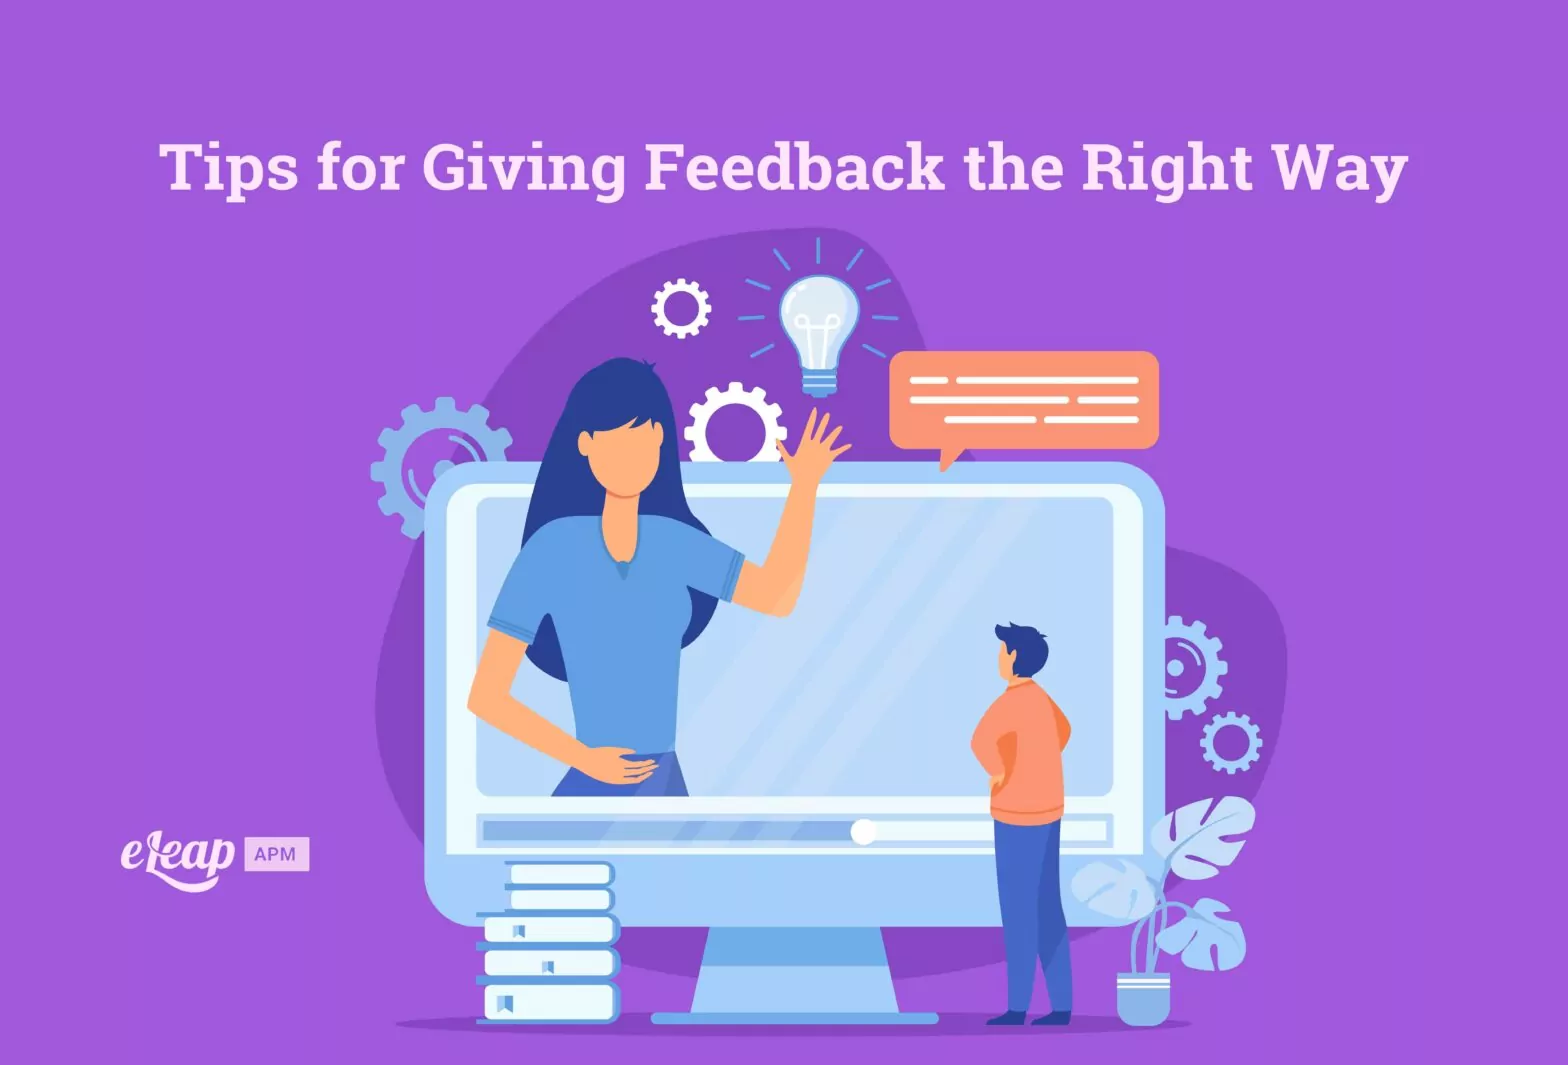 Tips for Giving Feedback the Right Way